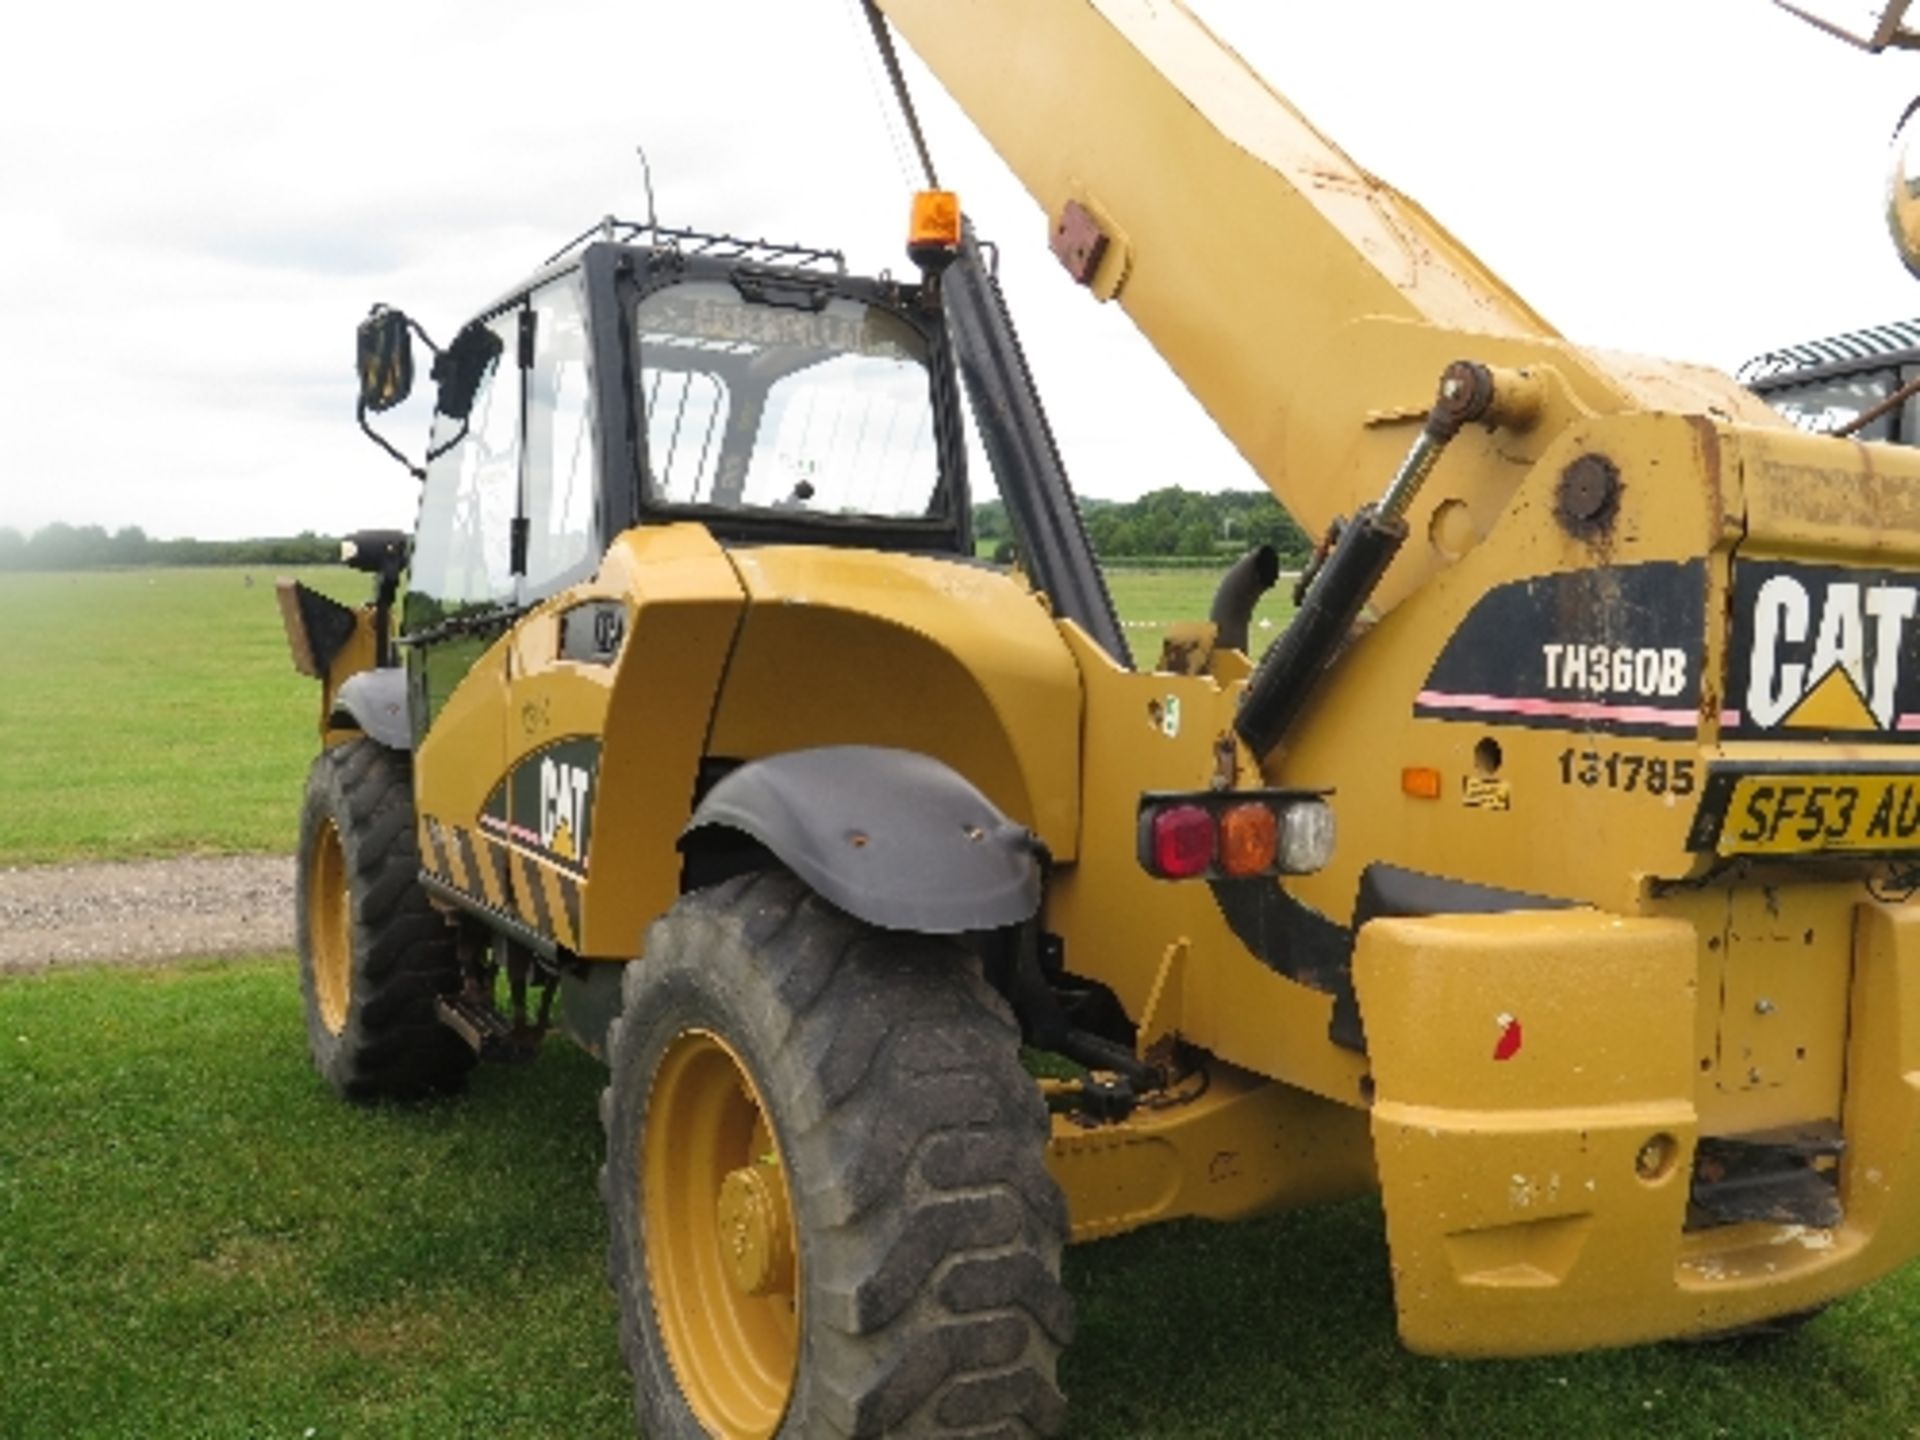 Caterpillar TH360B telehandler 6175 hrs 2004 131785ALL LOTS are SOLD AS SEEN WITHOUT WARRANTY - Image 4 of 7